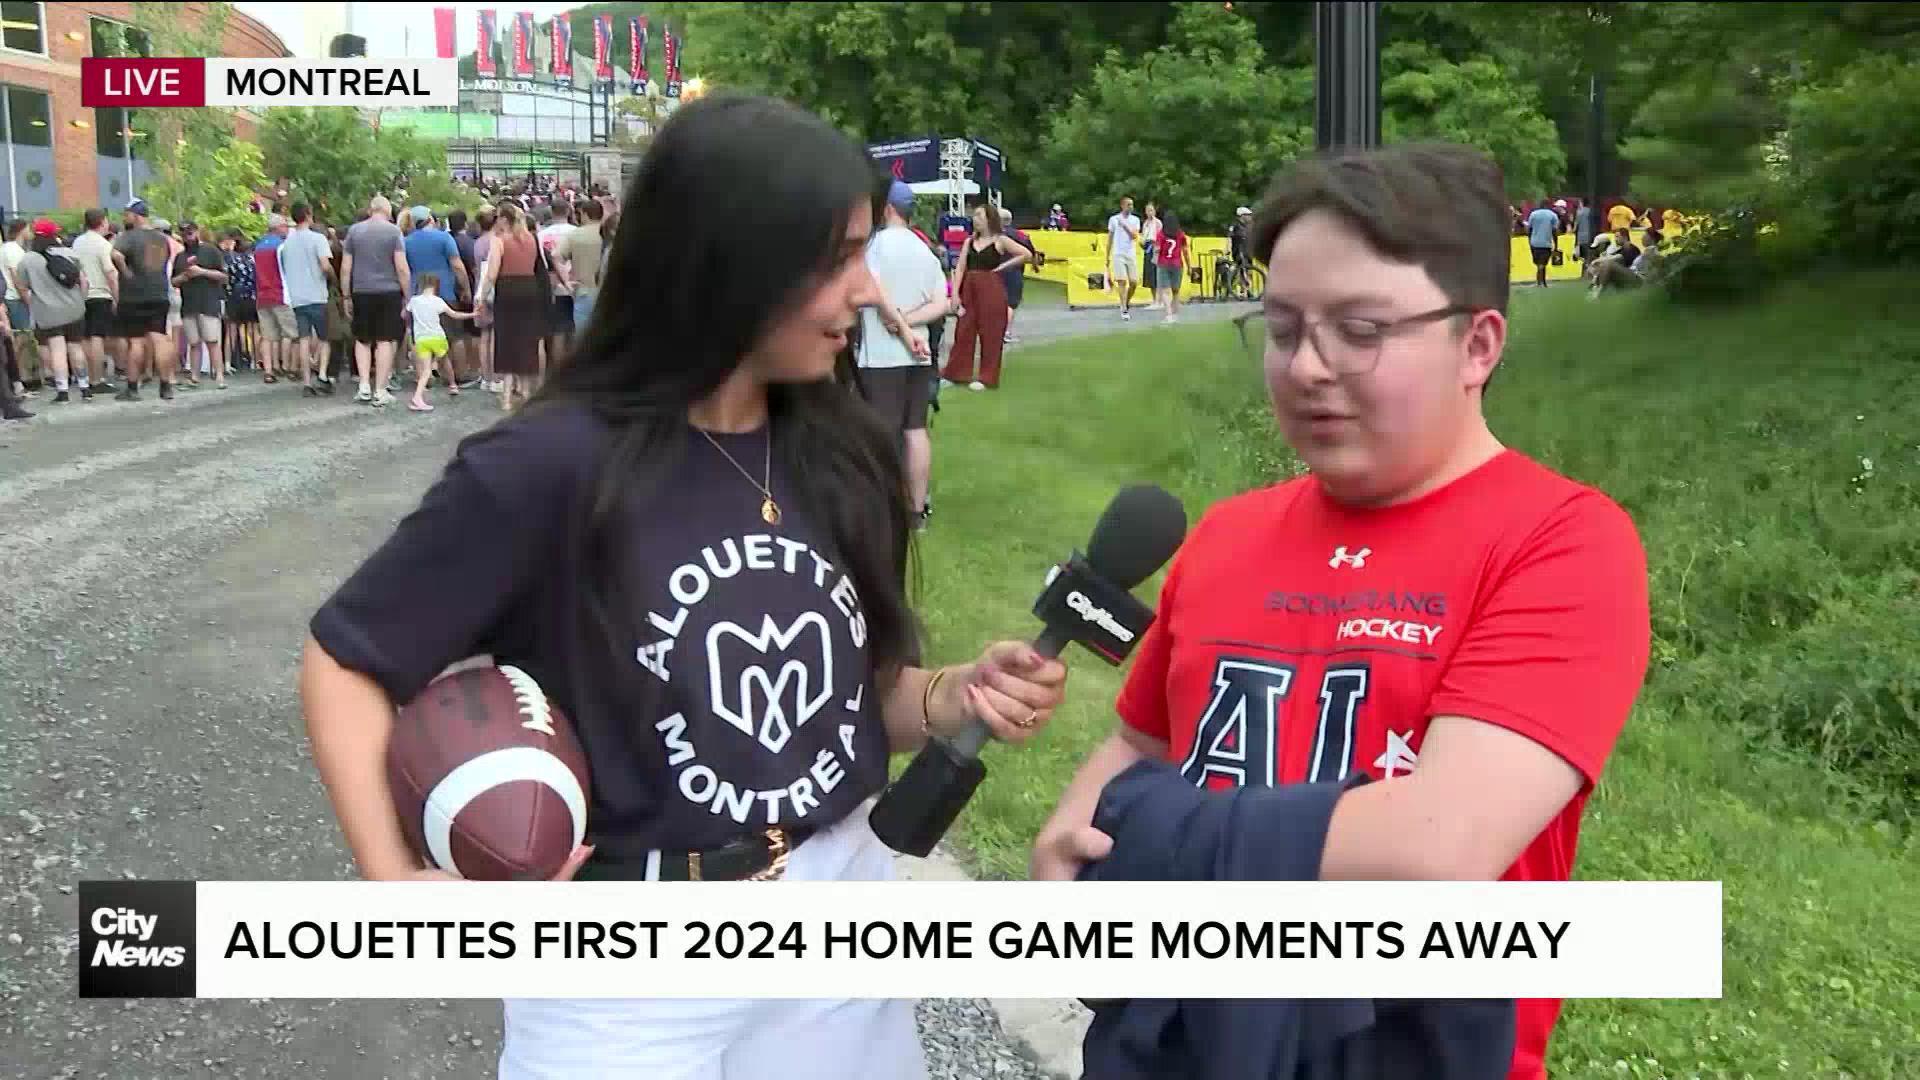 Alouettes first 2024 home game moments away